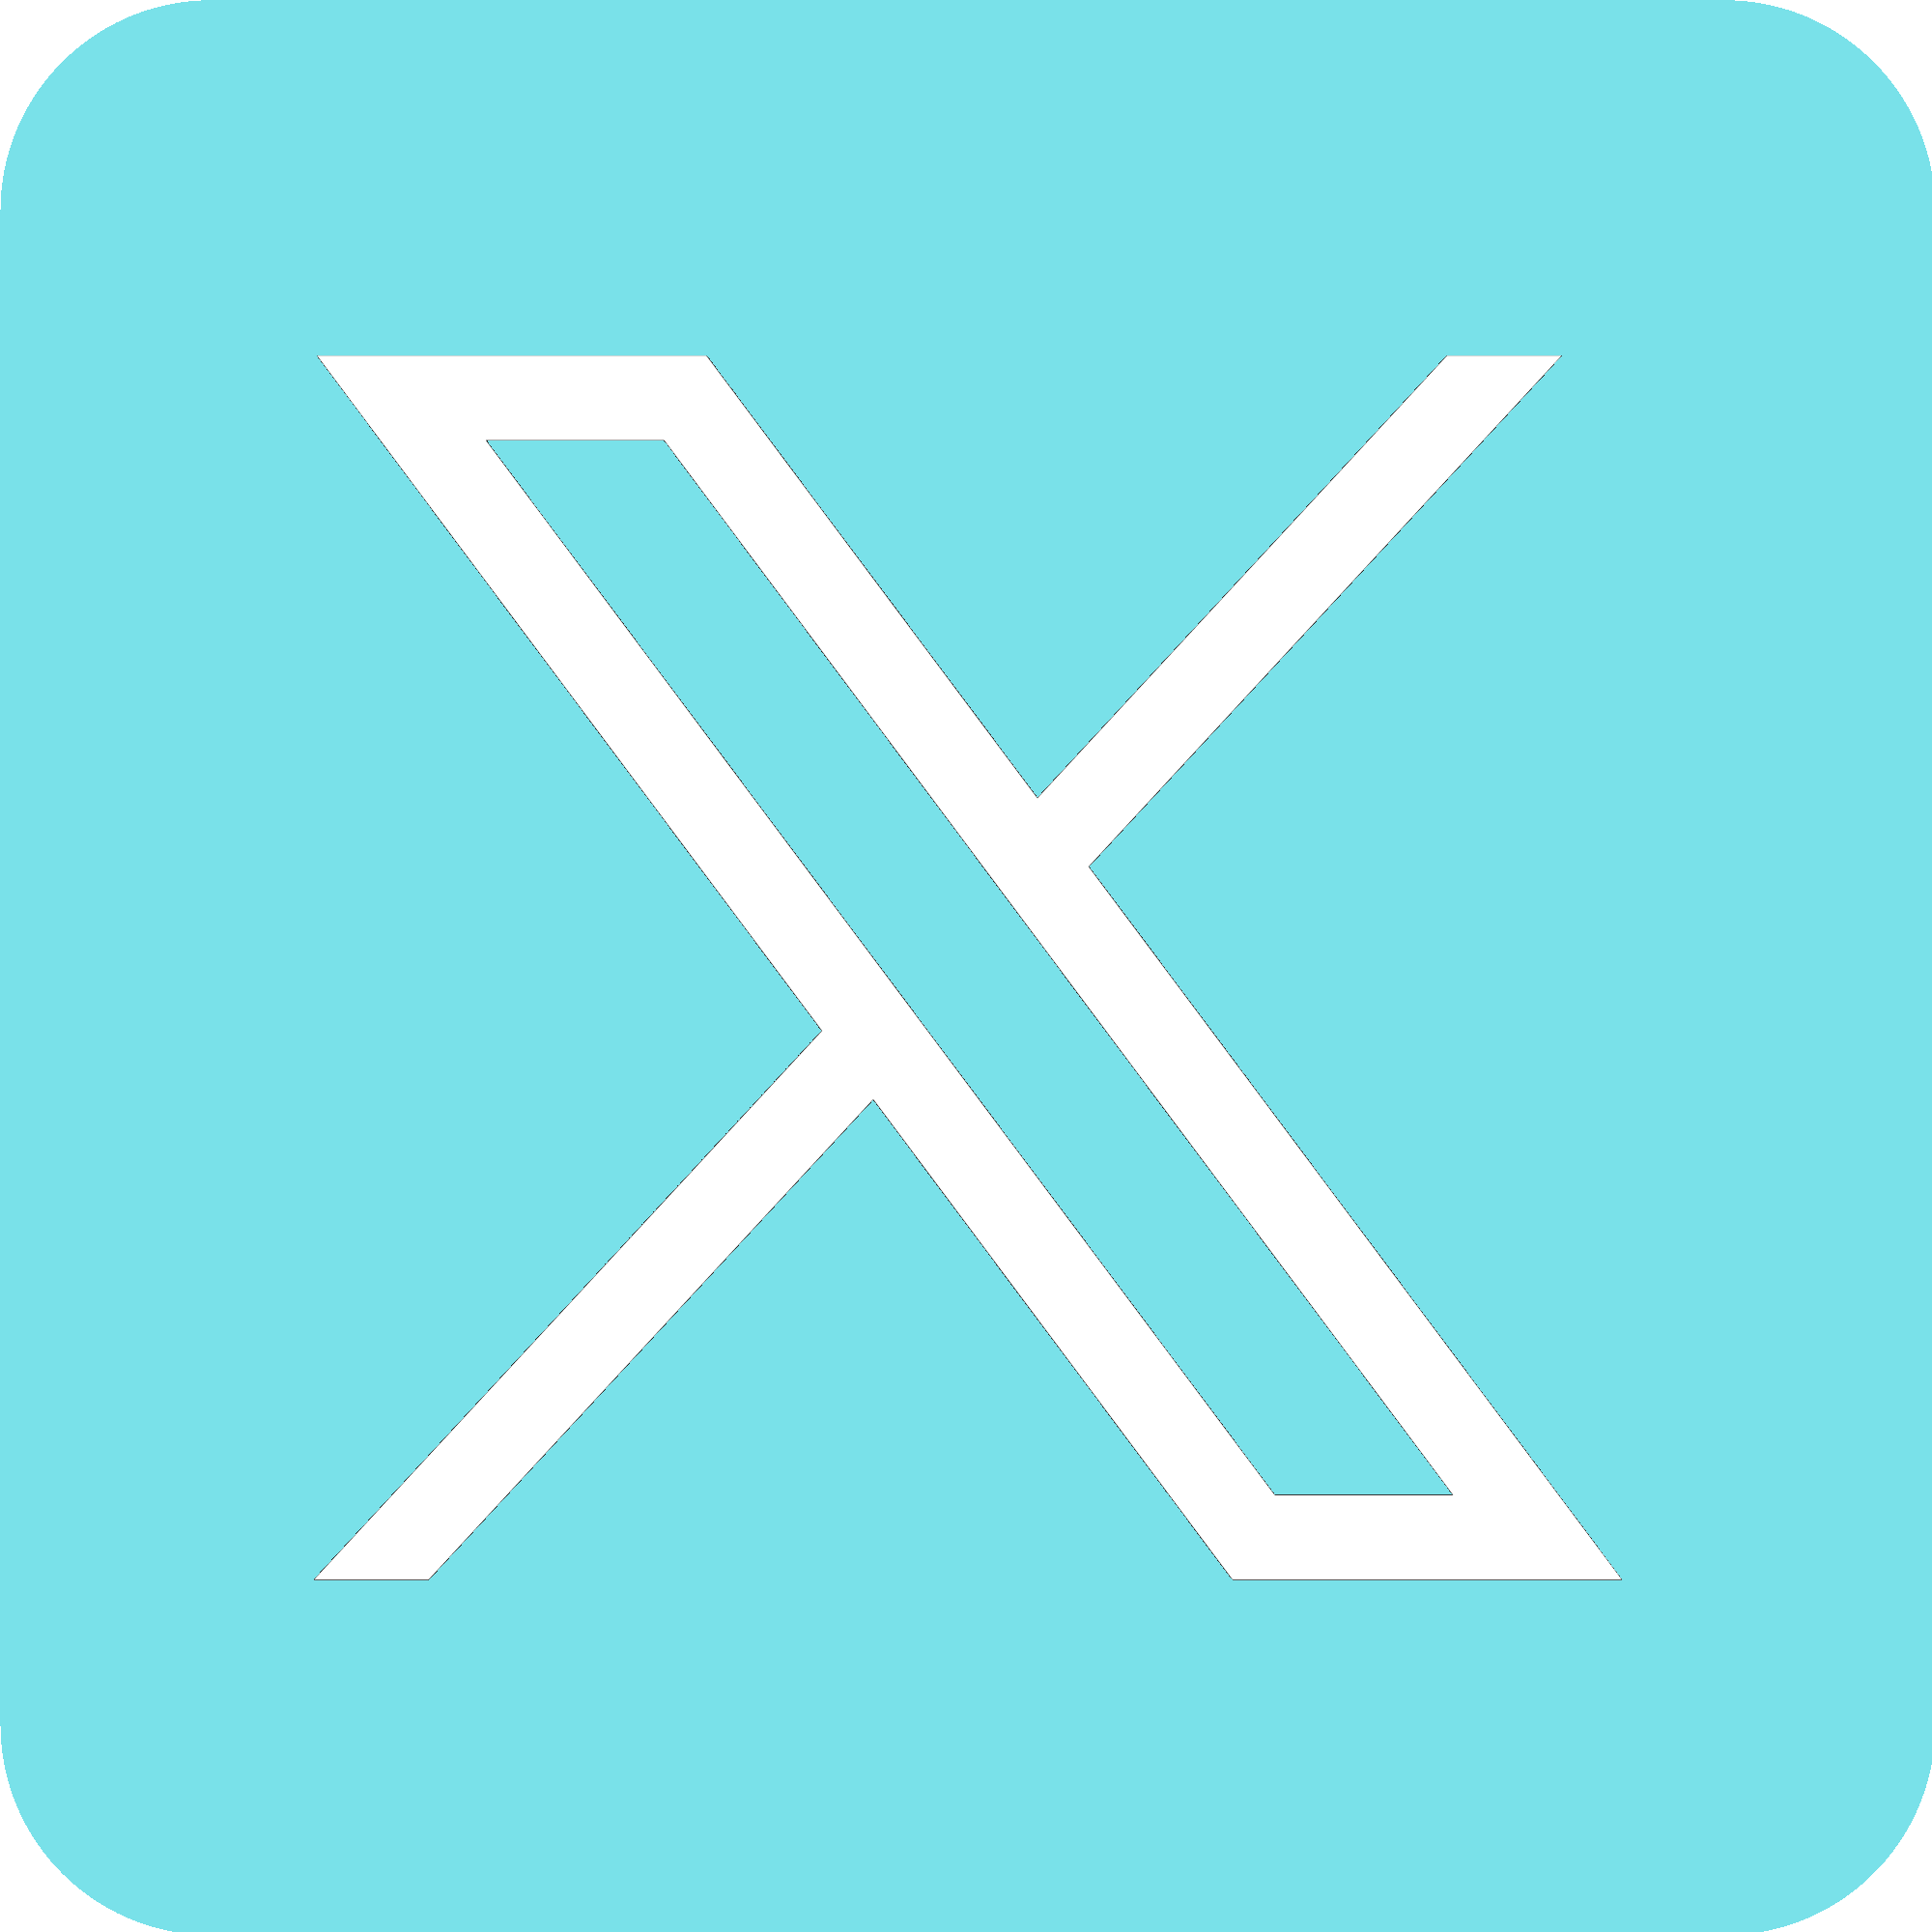 X icon in blue